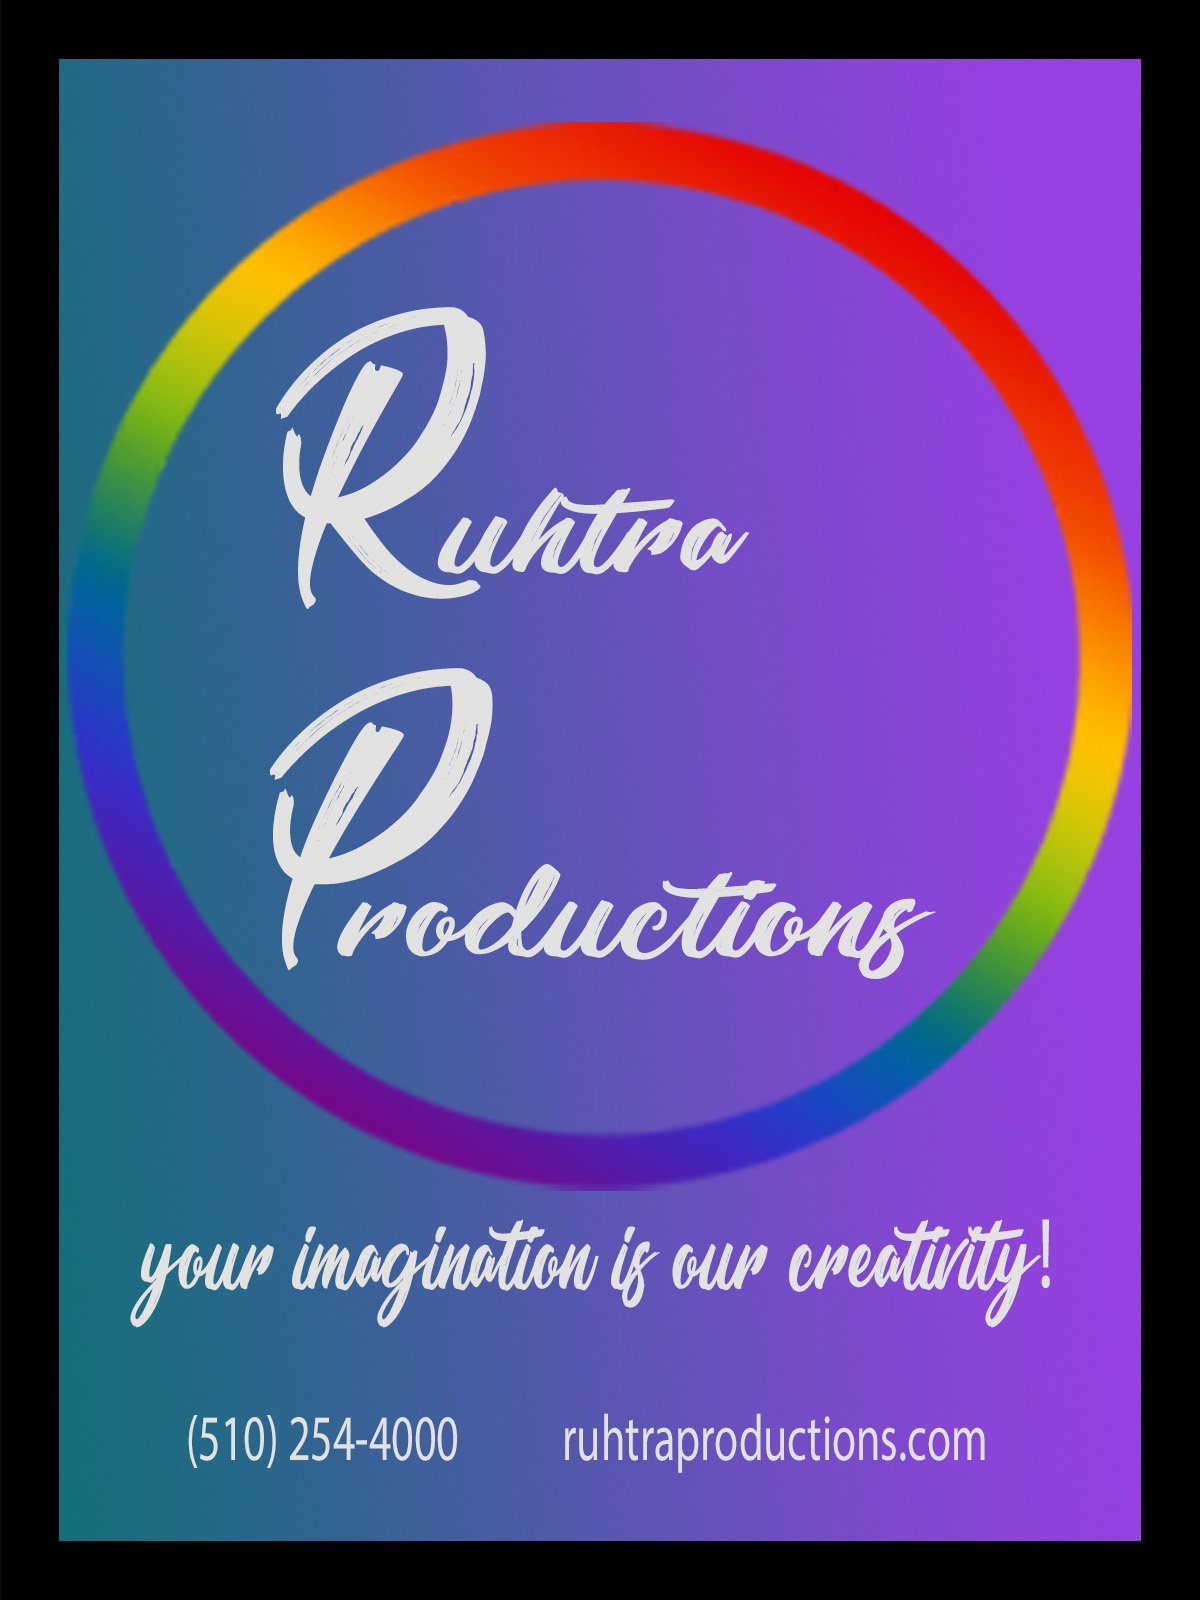 Ruhtra Productions